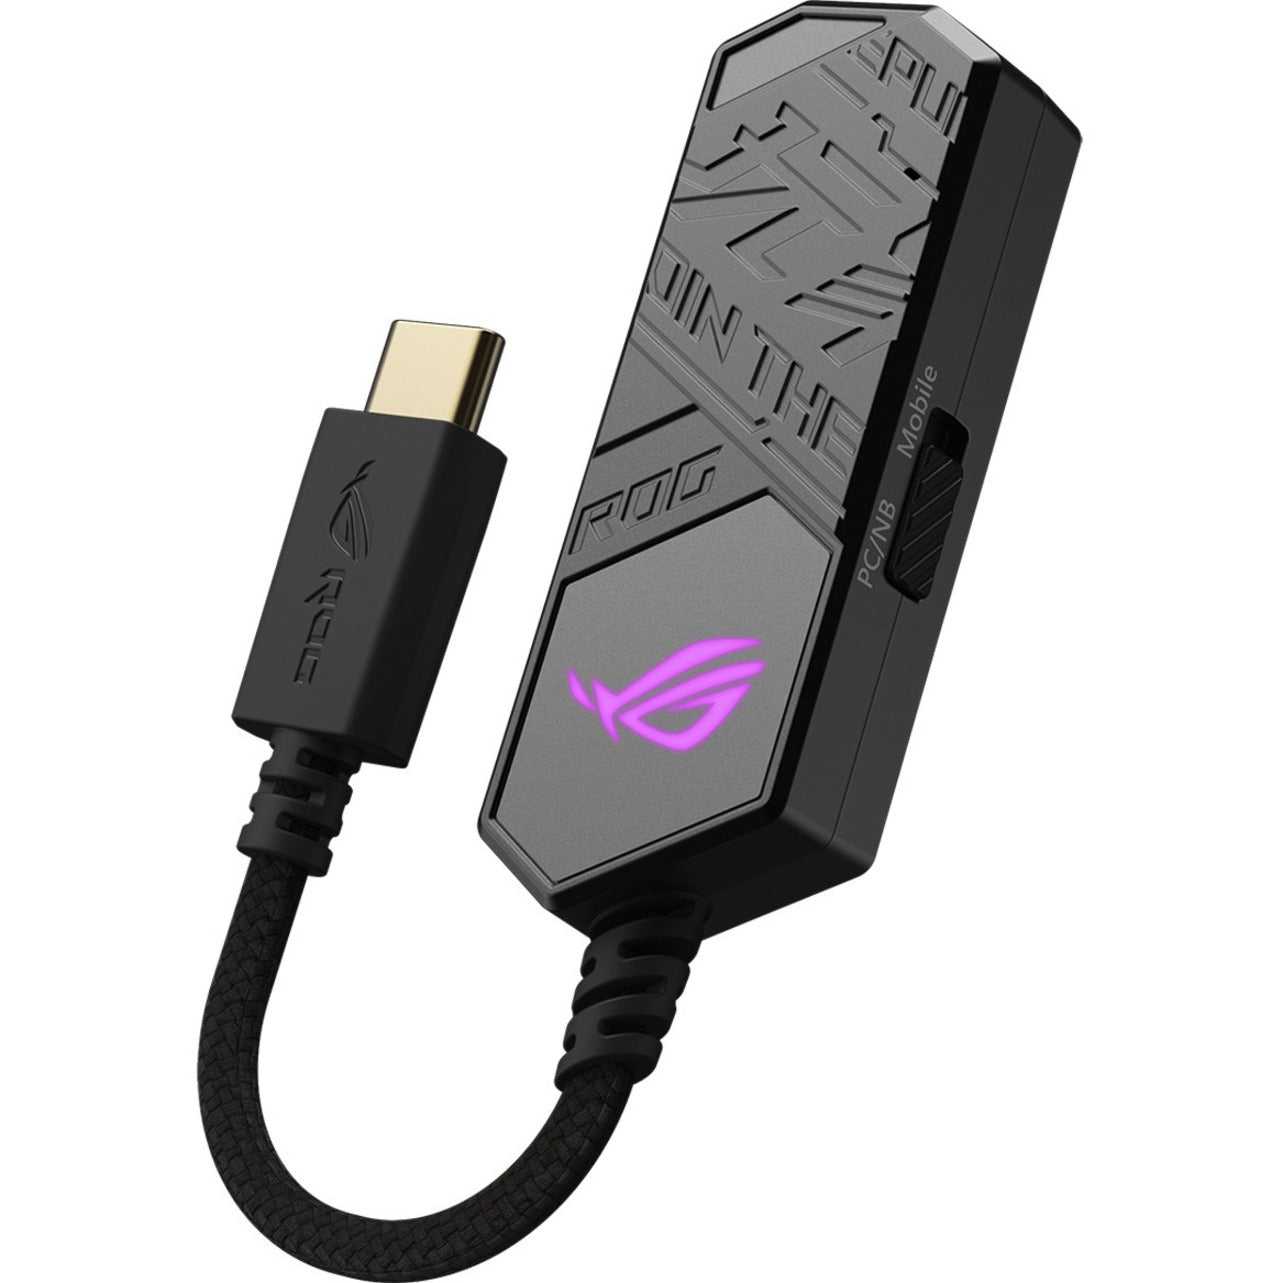 Asus ROG CLAVIS Digital-to-analog Audio Converter, USB-C to USB 2.0 Cable Included